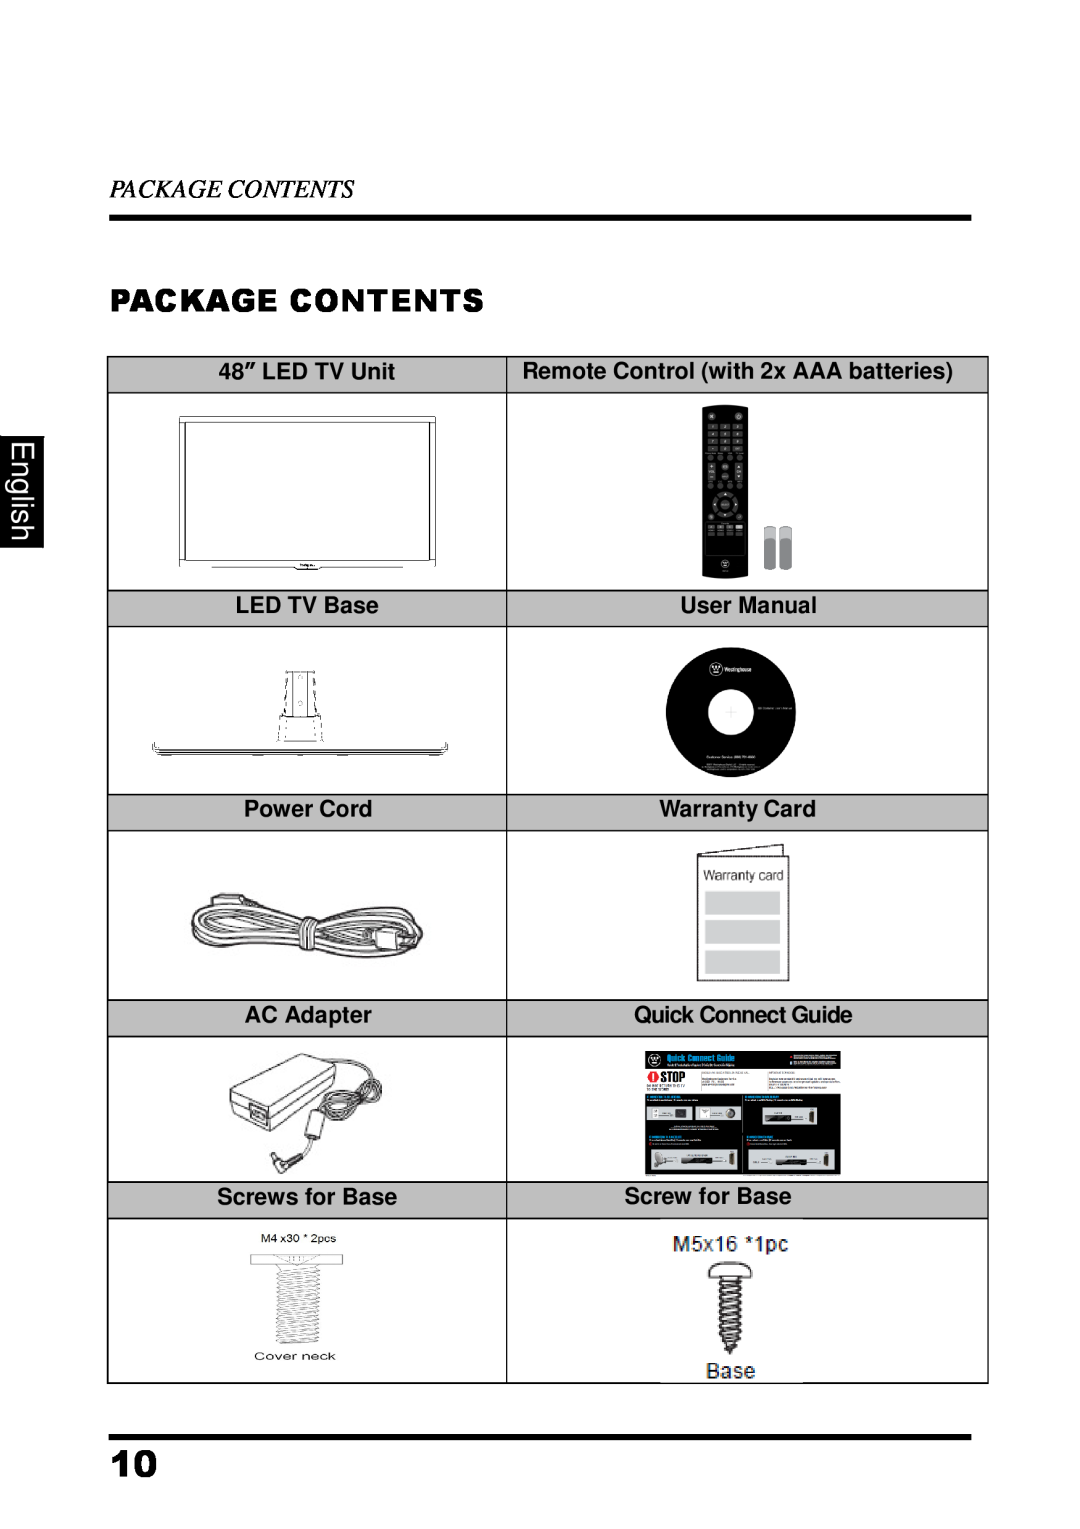 Westinghouse UW48T7HW manual Package Contents, English, 48” LED TV Unit, Remote Control with 2x AAA batteries, LED TV Base 